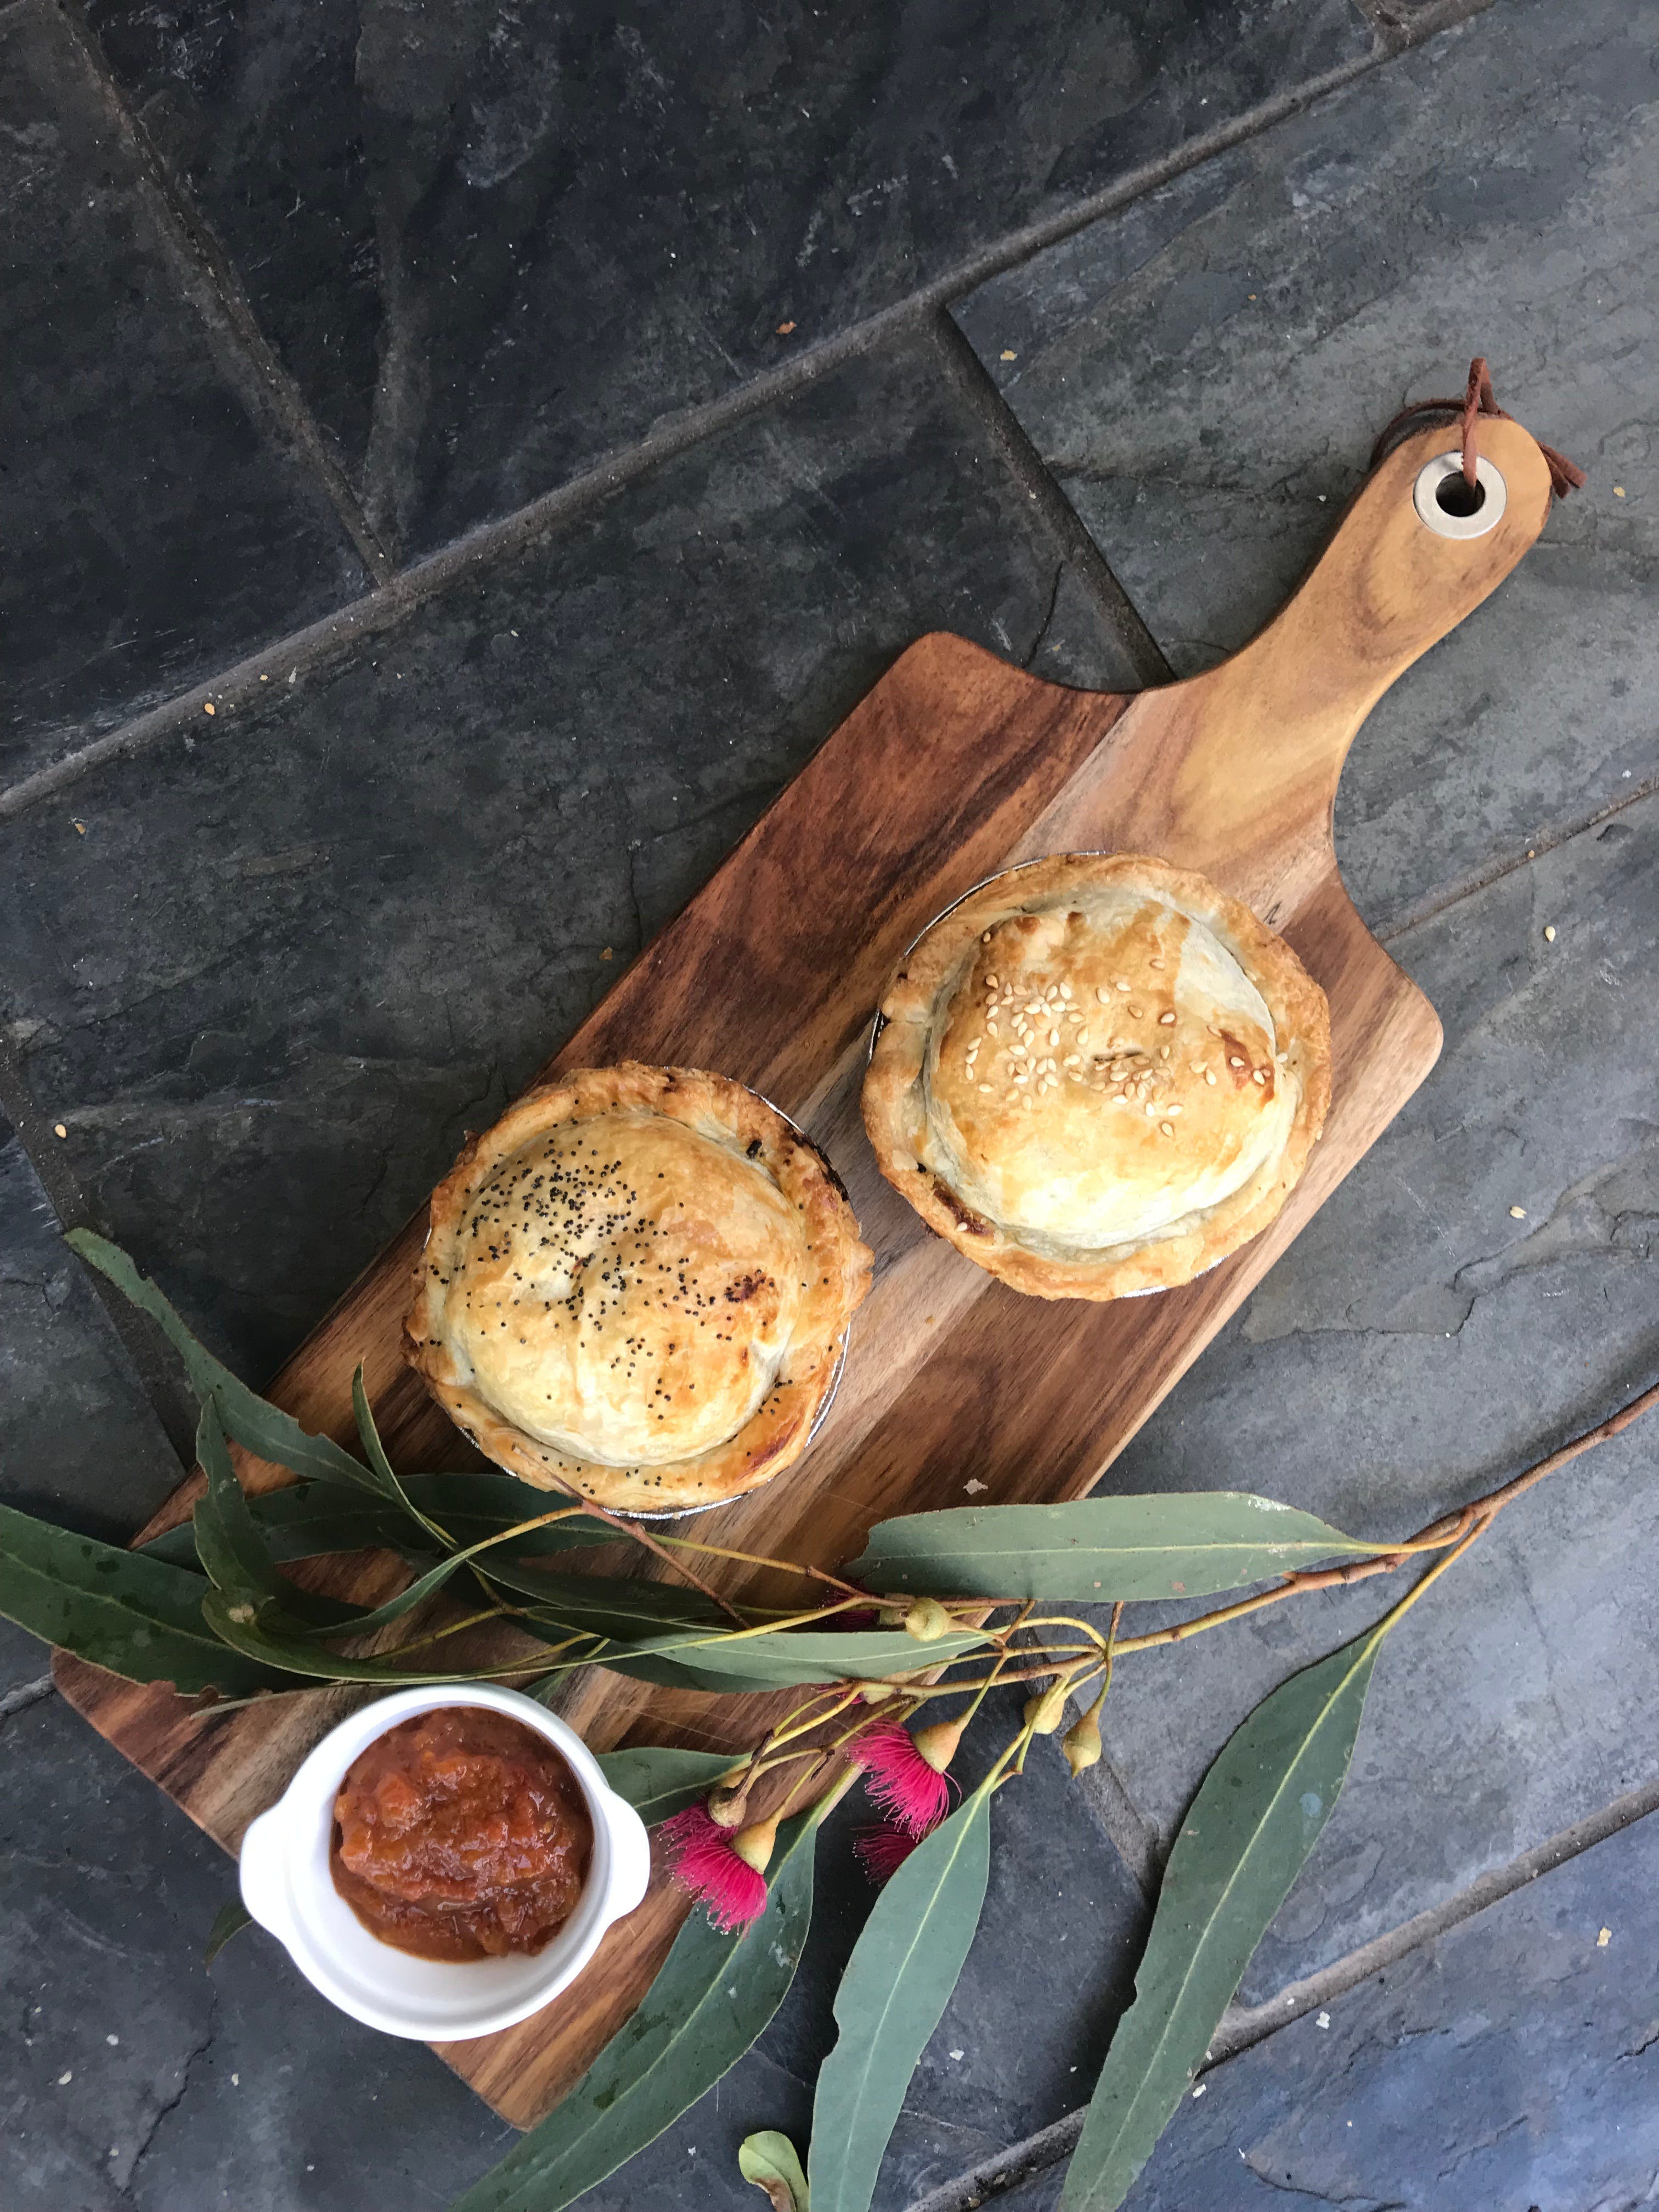 Aged Wine and Vintage Pies - Casino Accommodation